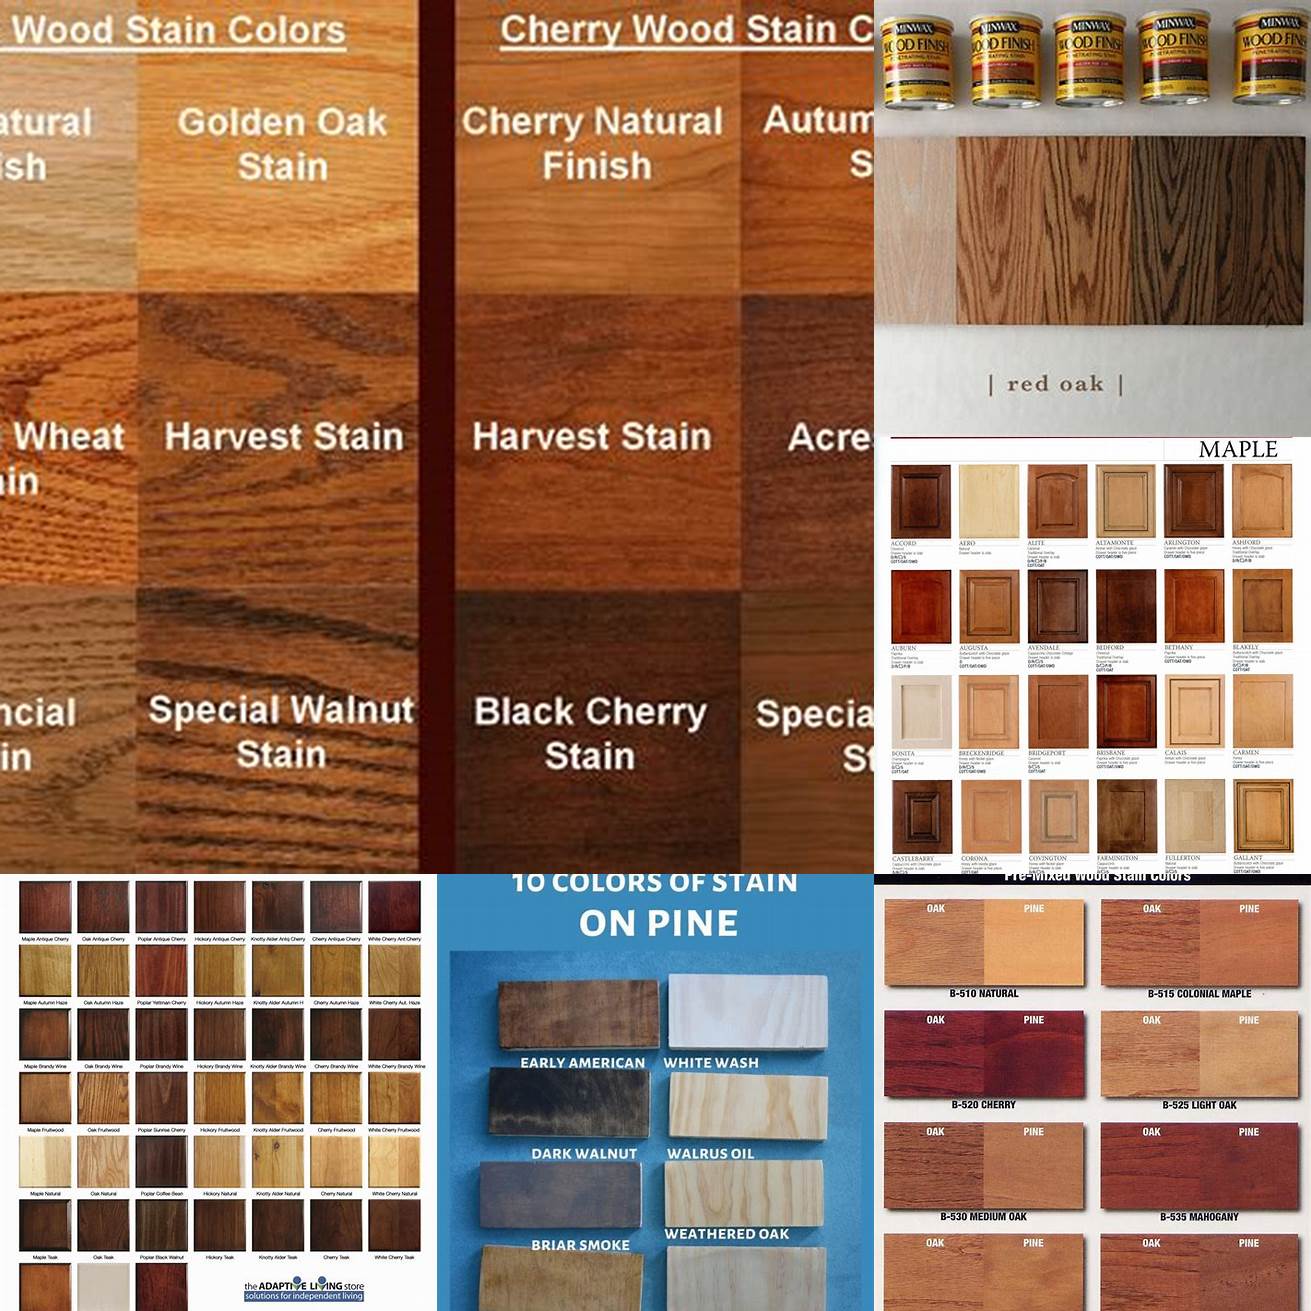 Staining in different colors